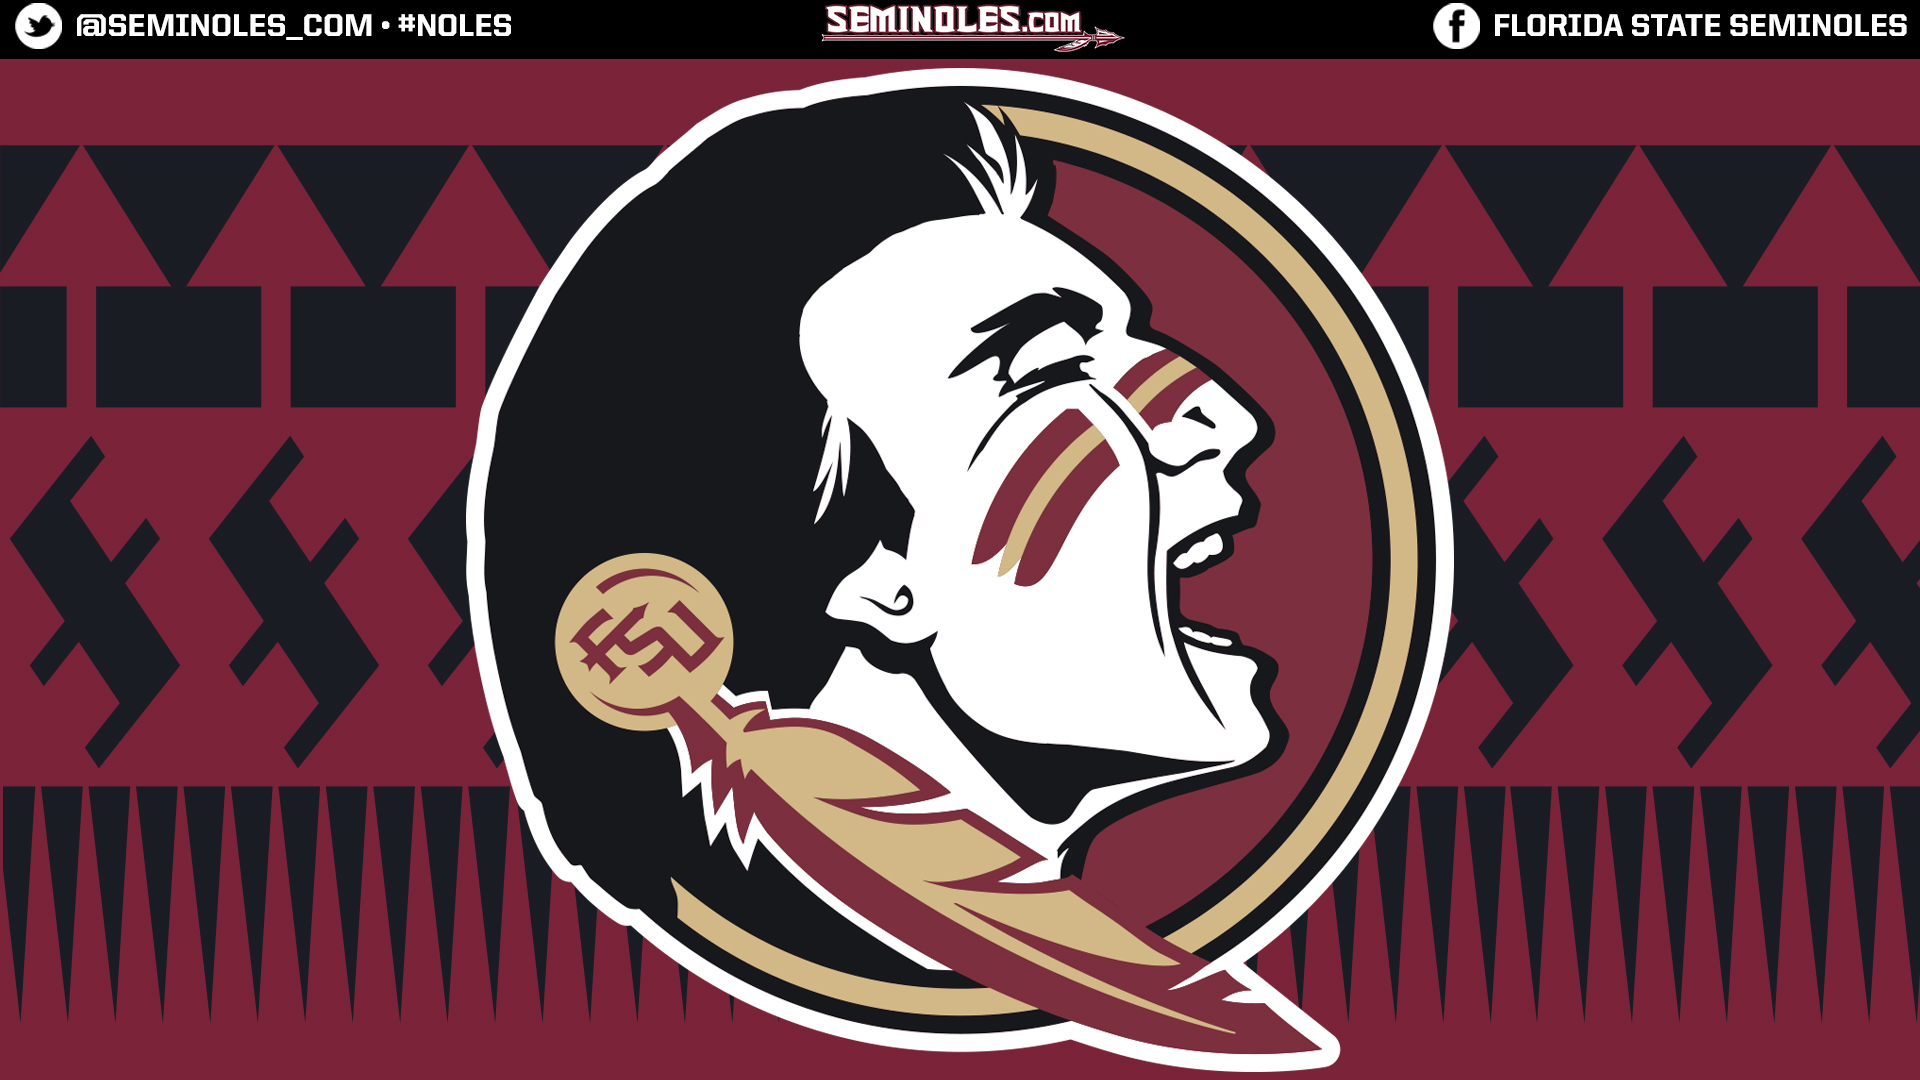 Florida state wallpapers